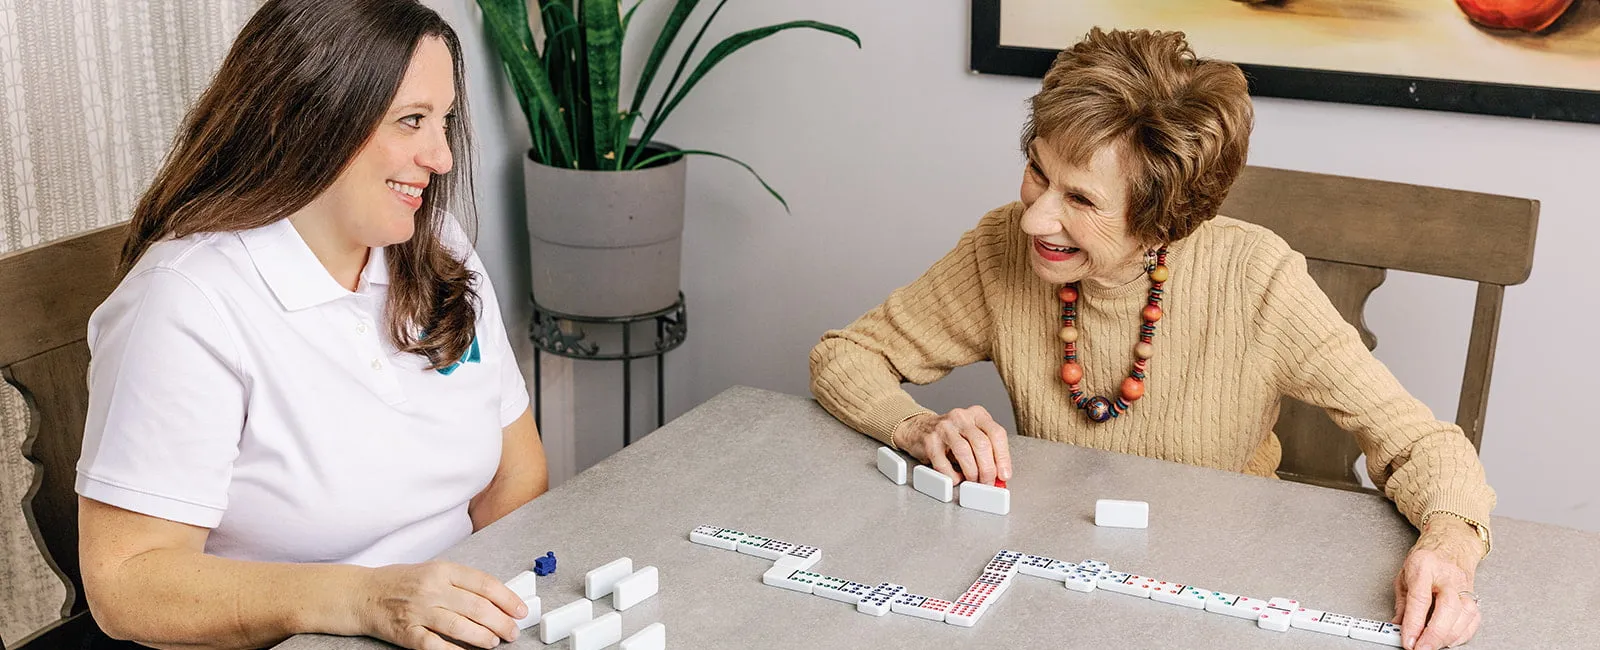 Memory Games Can Help Seniors with Dementia